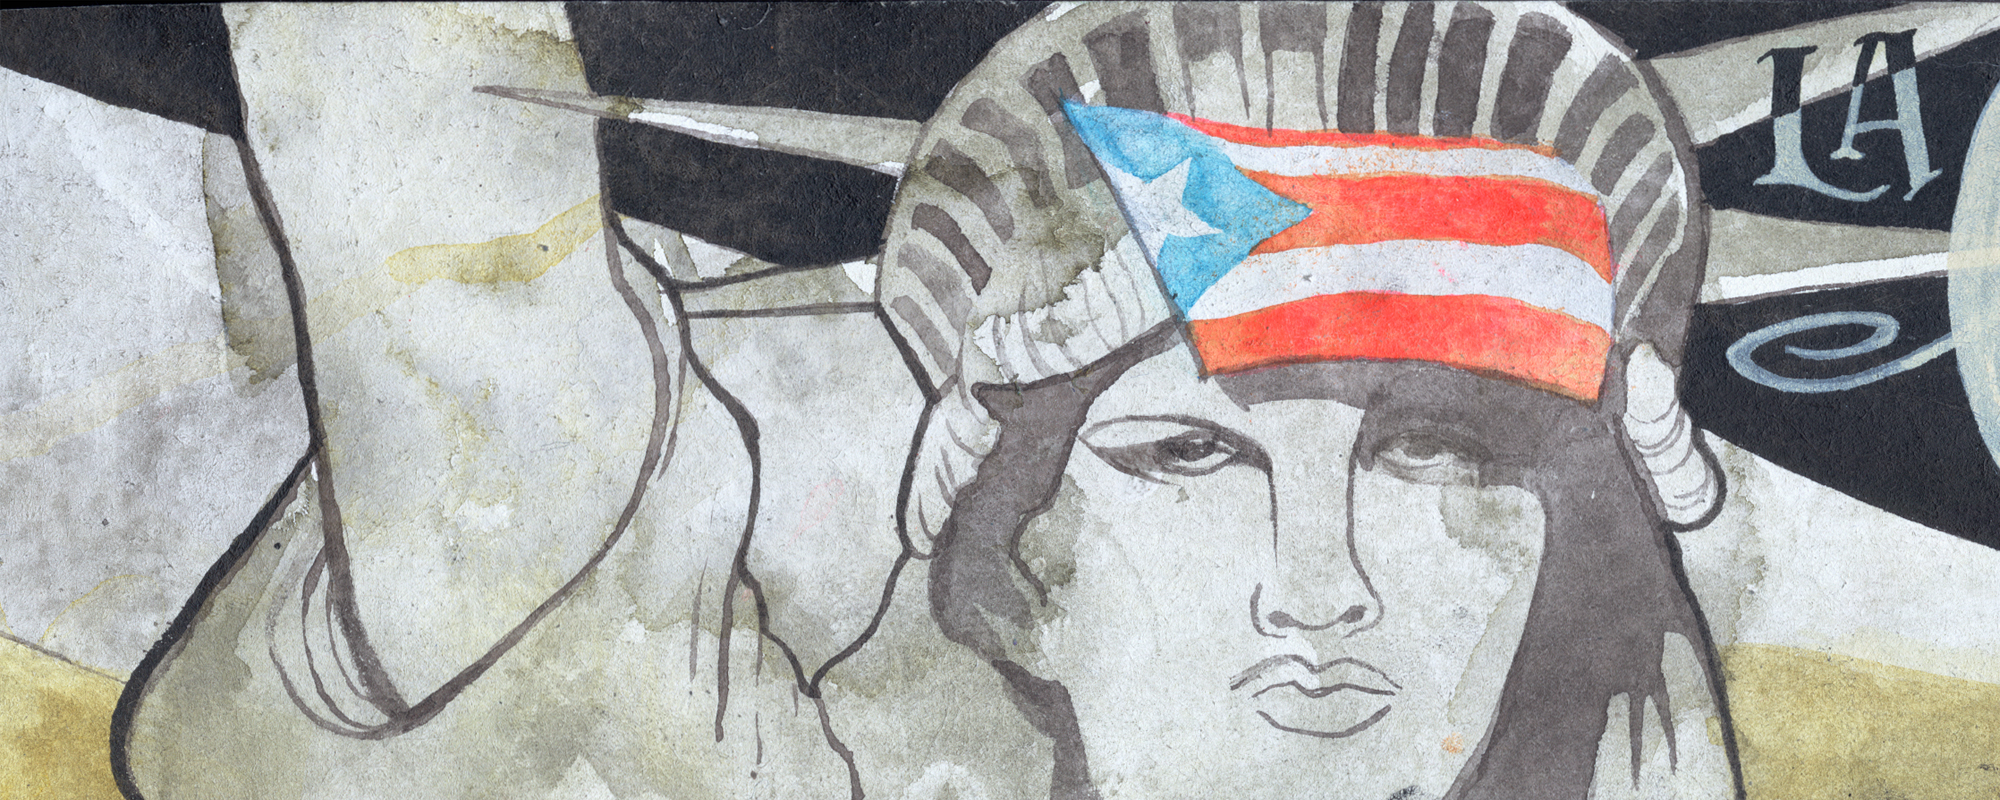 End the debt! Decolonize! Liberate Puerto Rico! Scroll